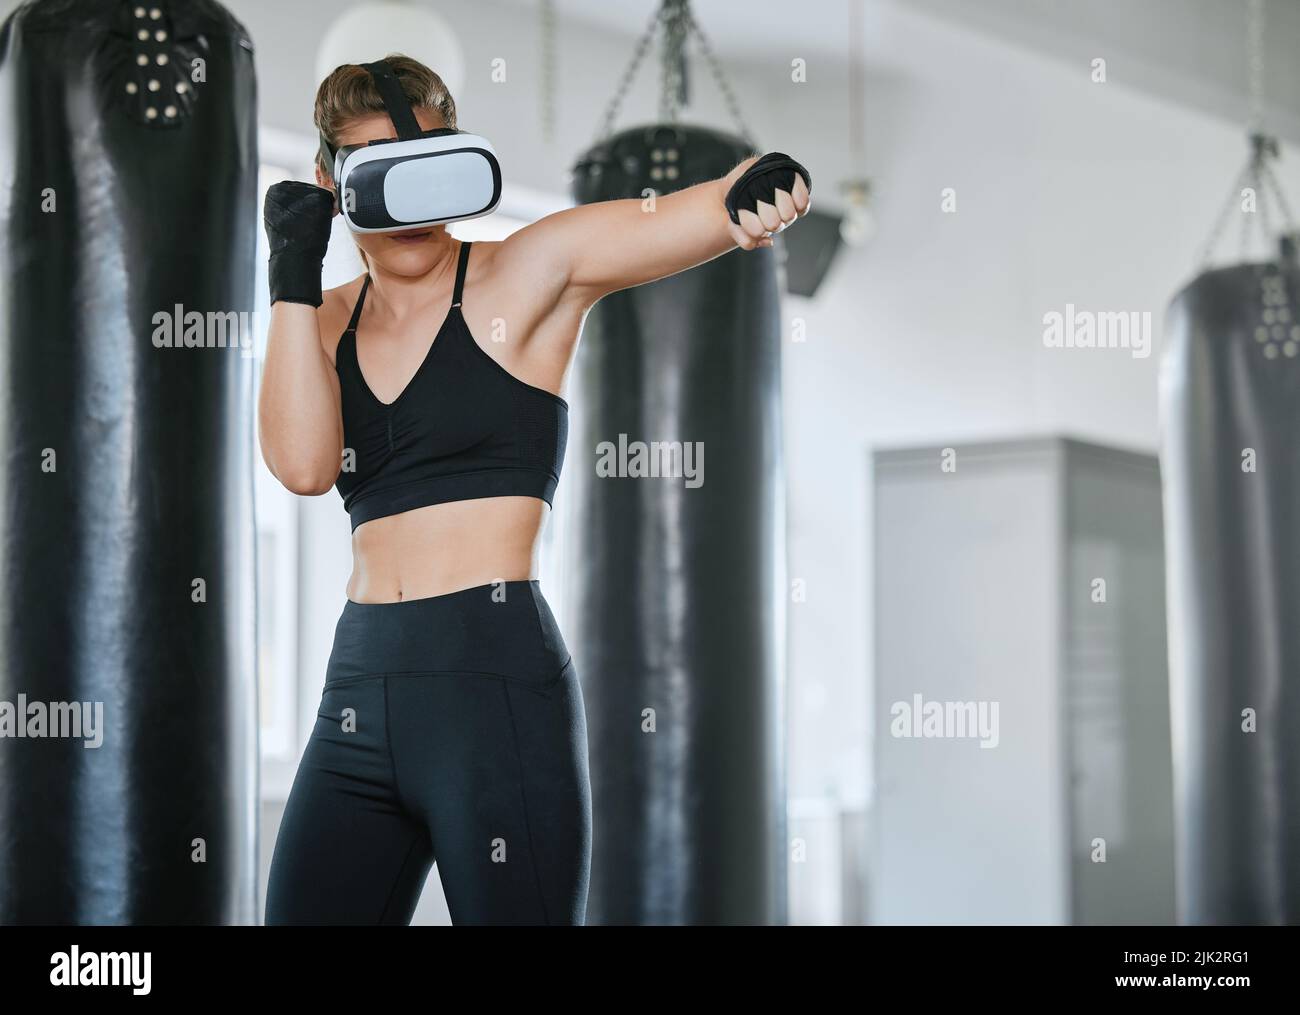 Healthy, fit and active boxing woman with a VR headset to access the metaverse while exercising, training and working out in a gym. Female boxer doing Stock Photo